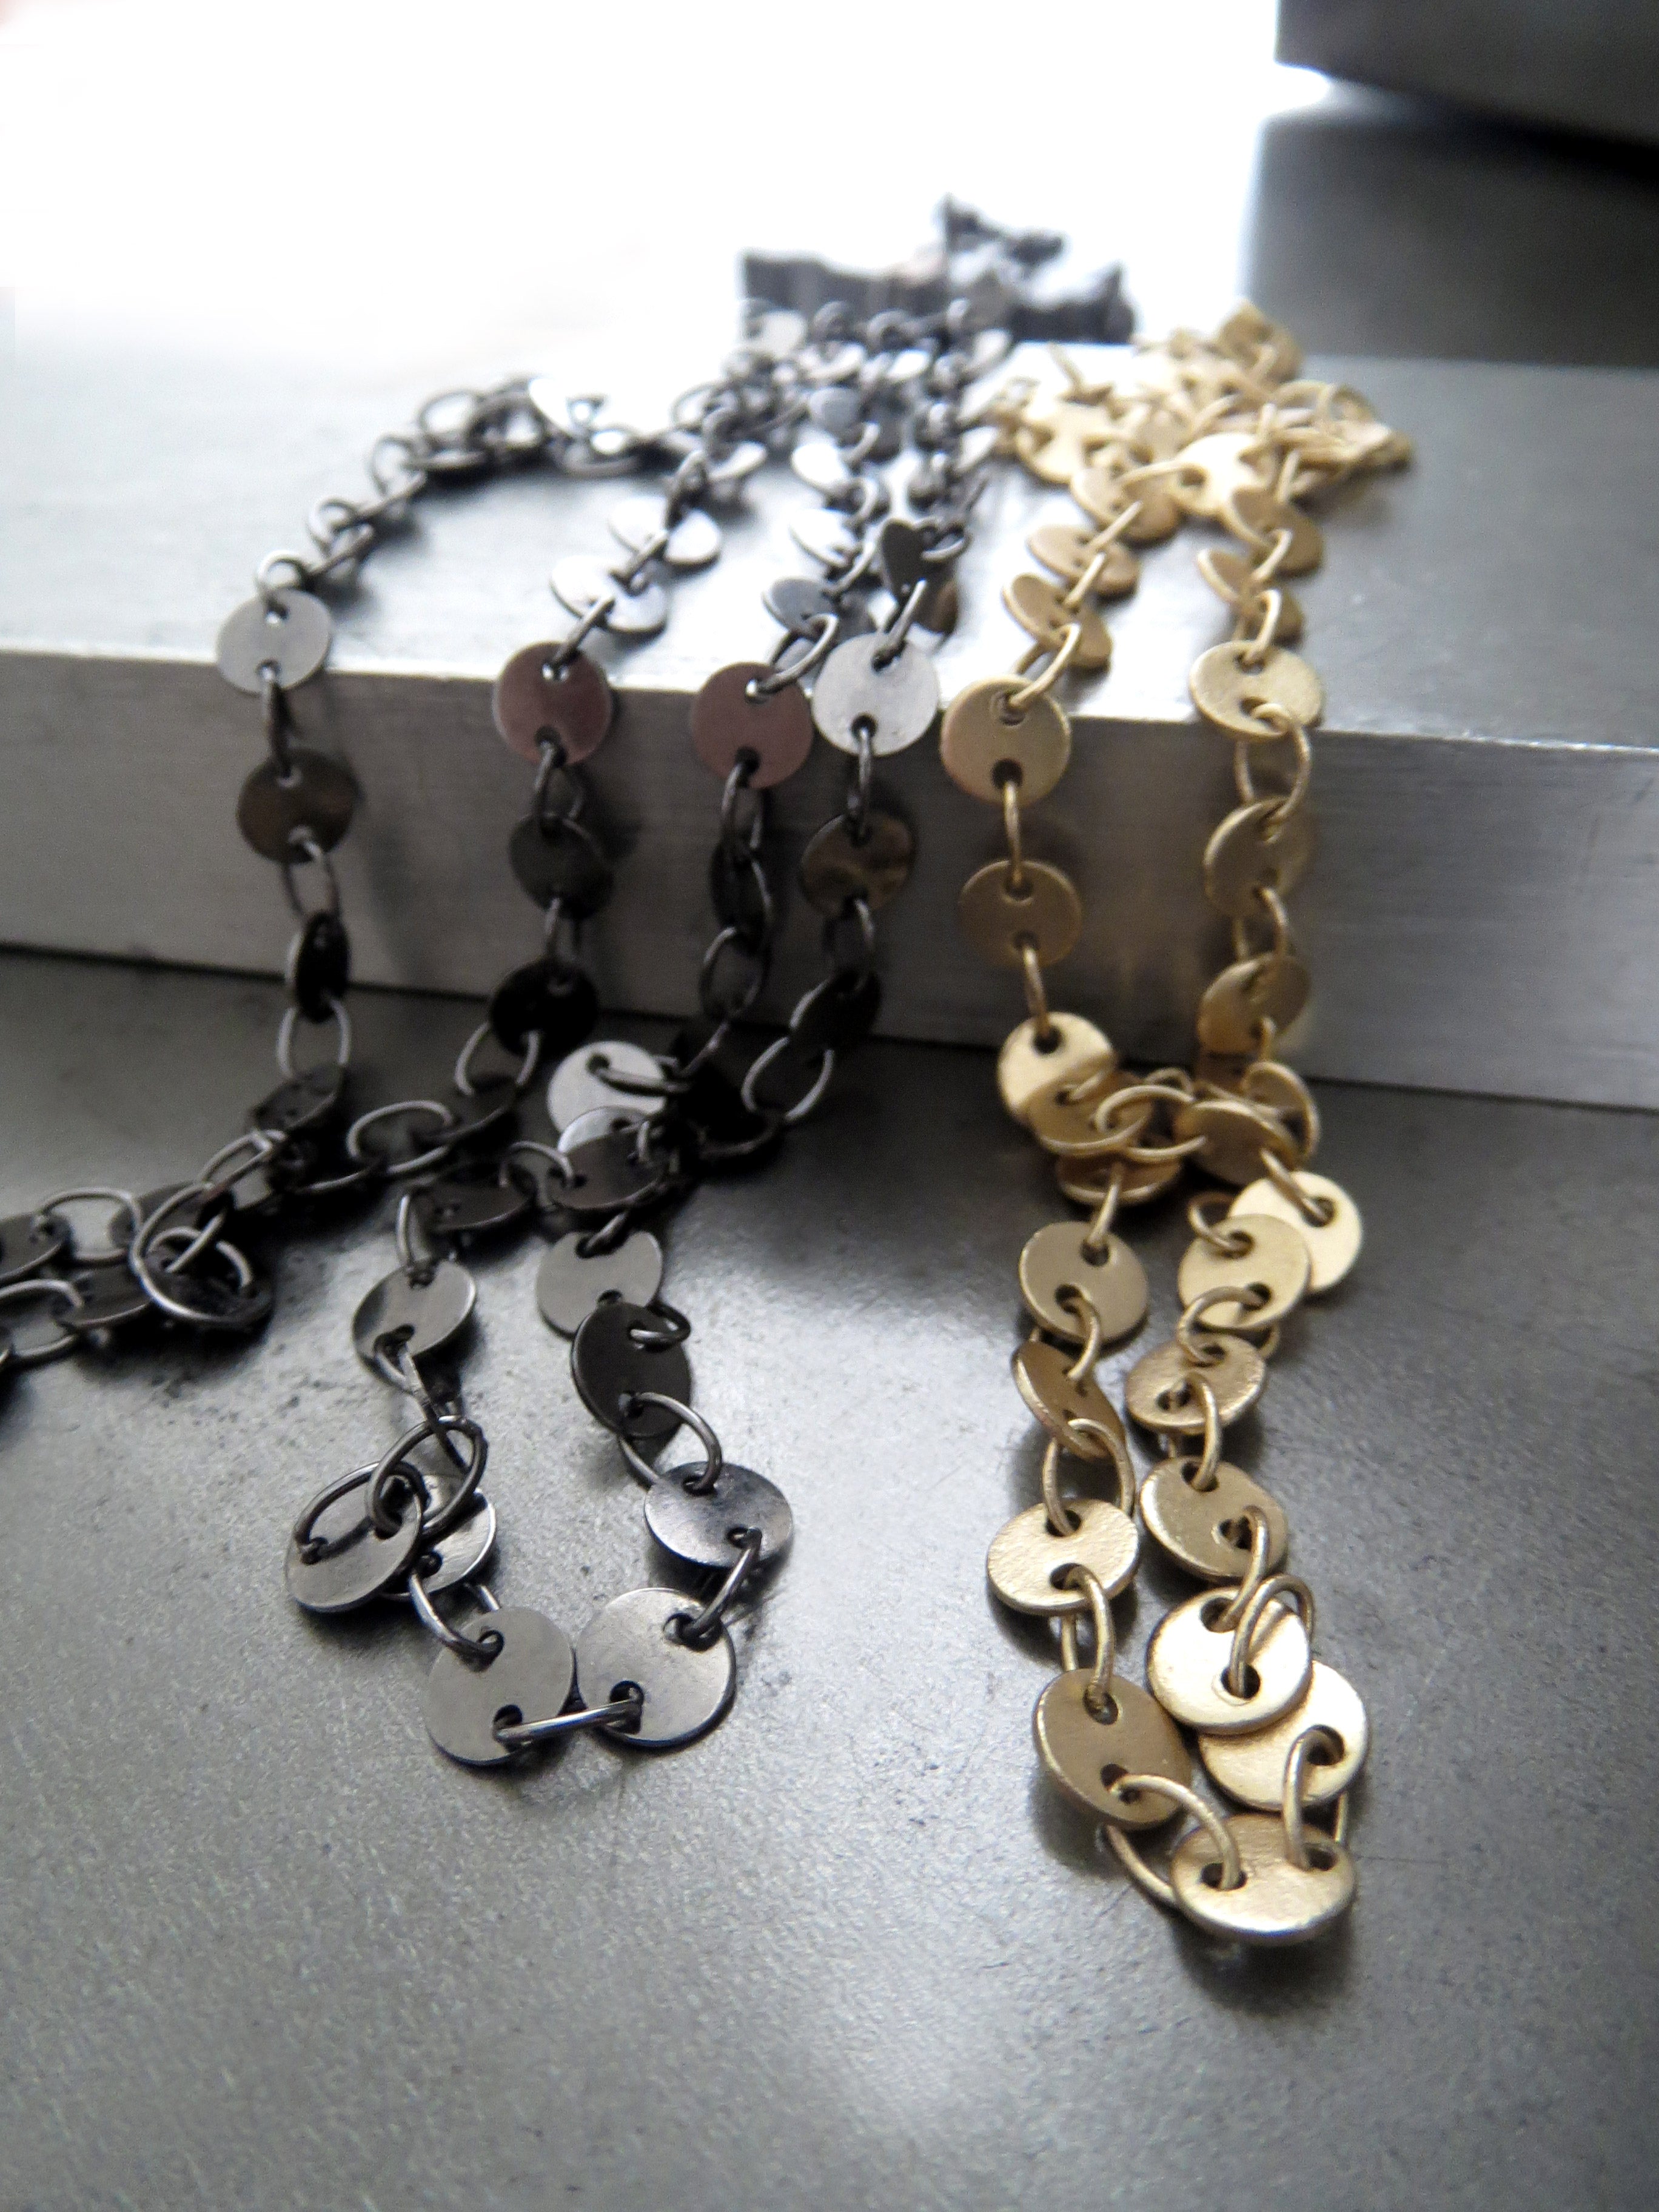 SHIMMER - Ultra Long Necklace in Sparkly Black and Gold Coin Chain